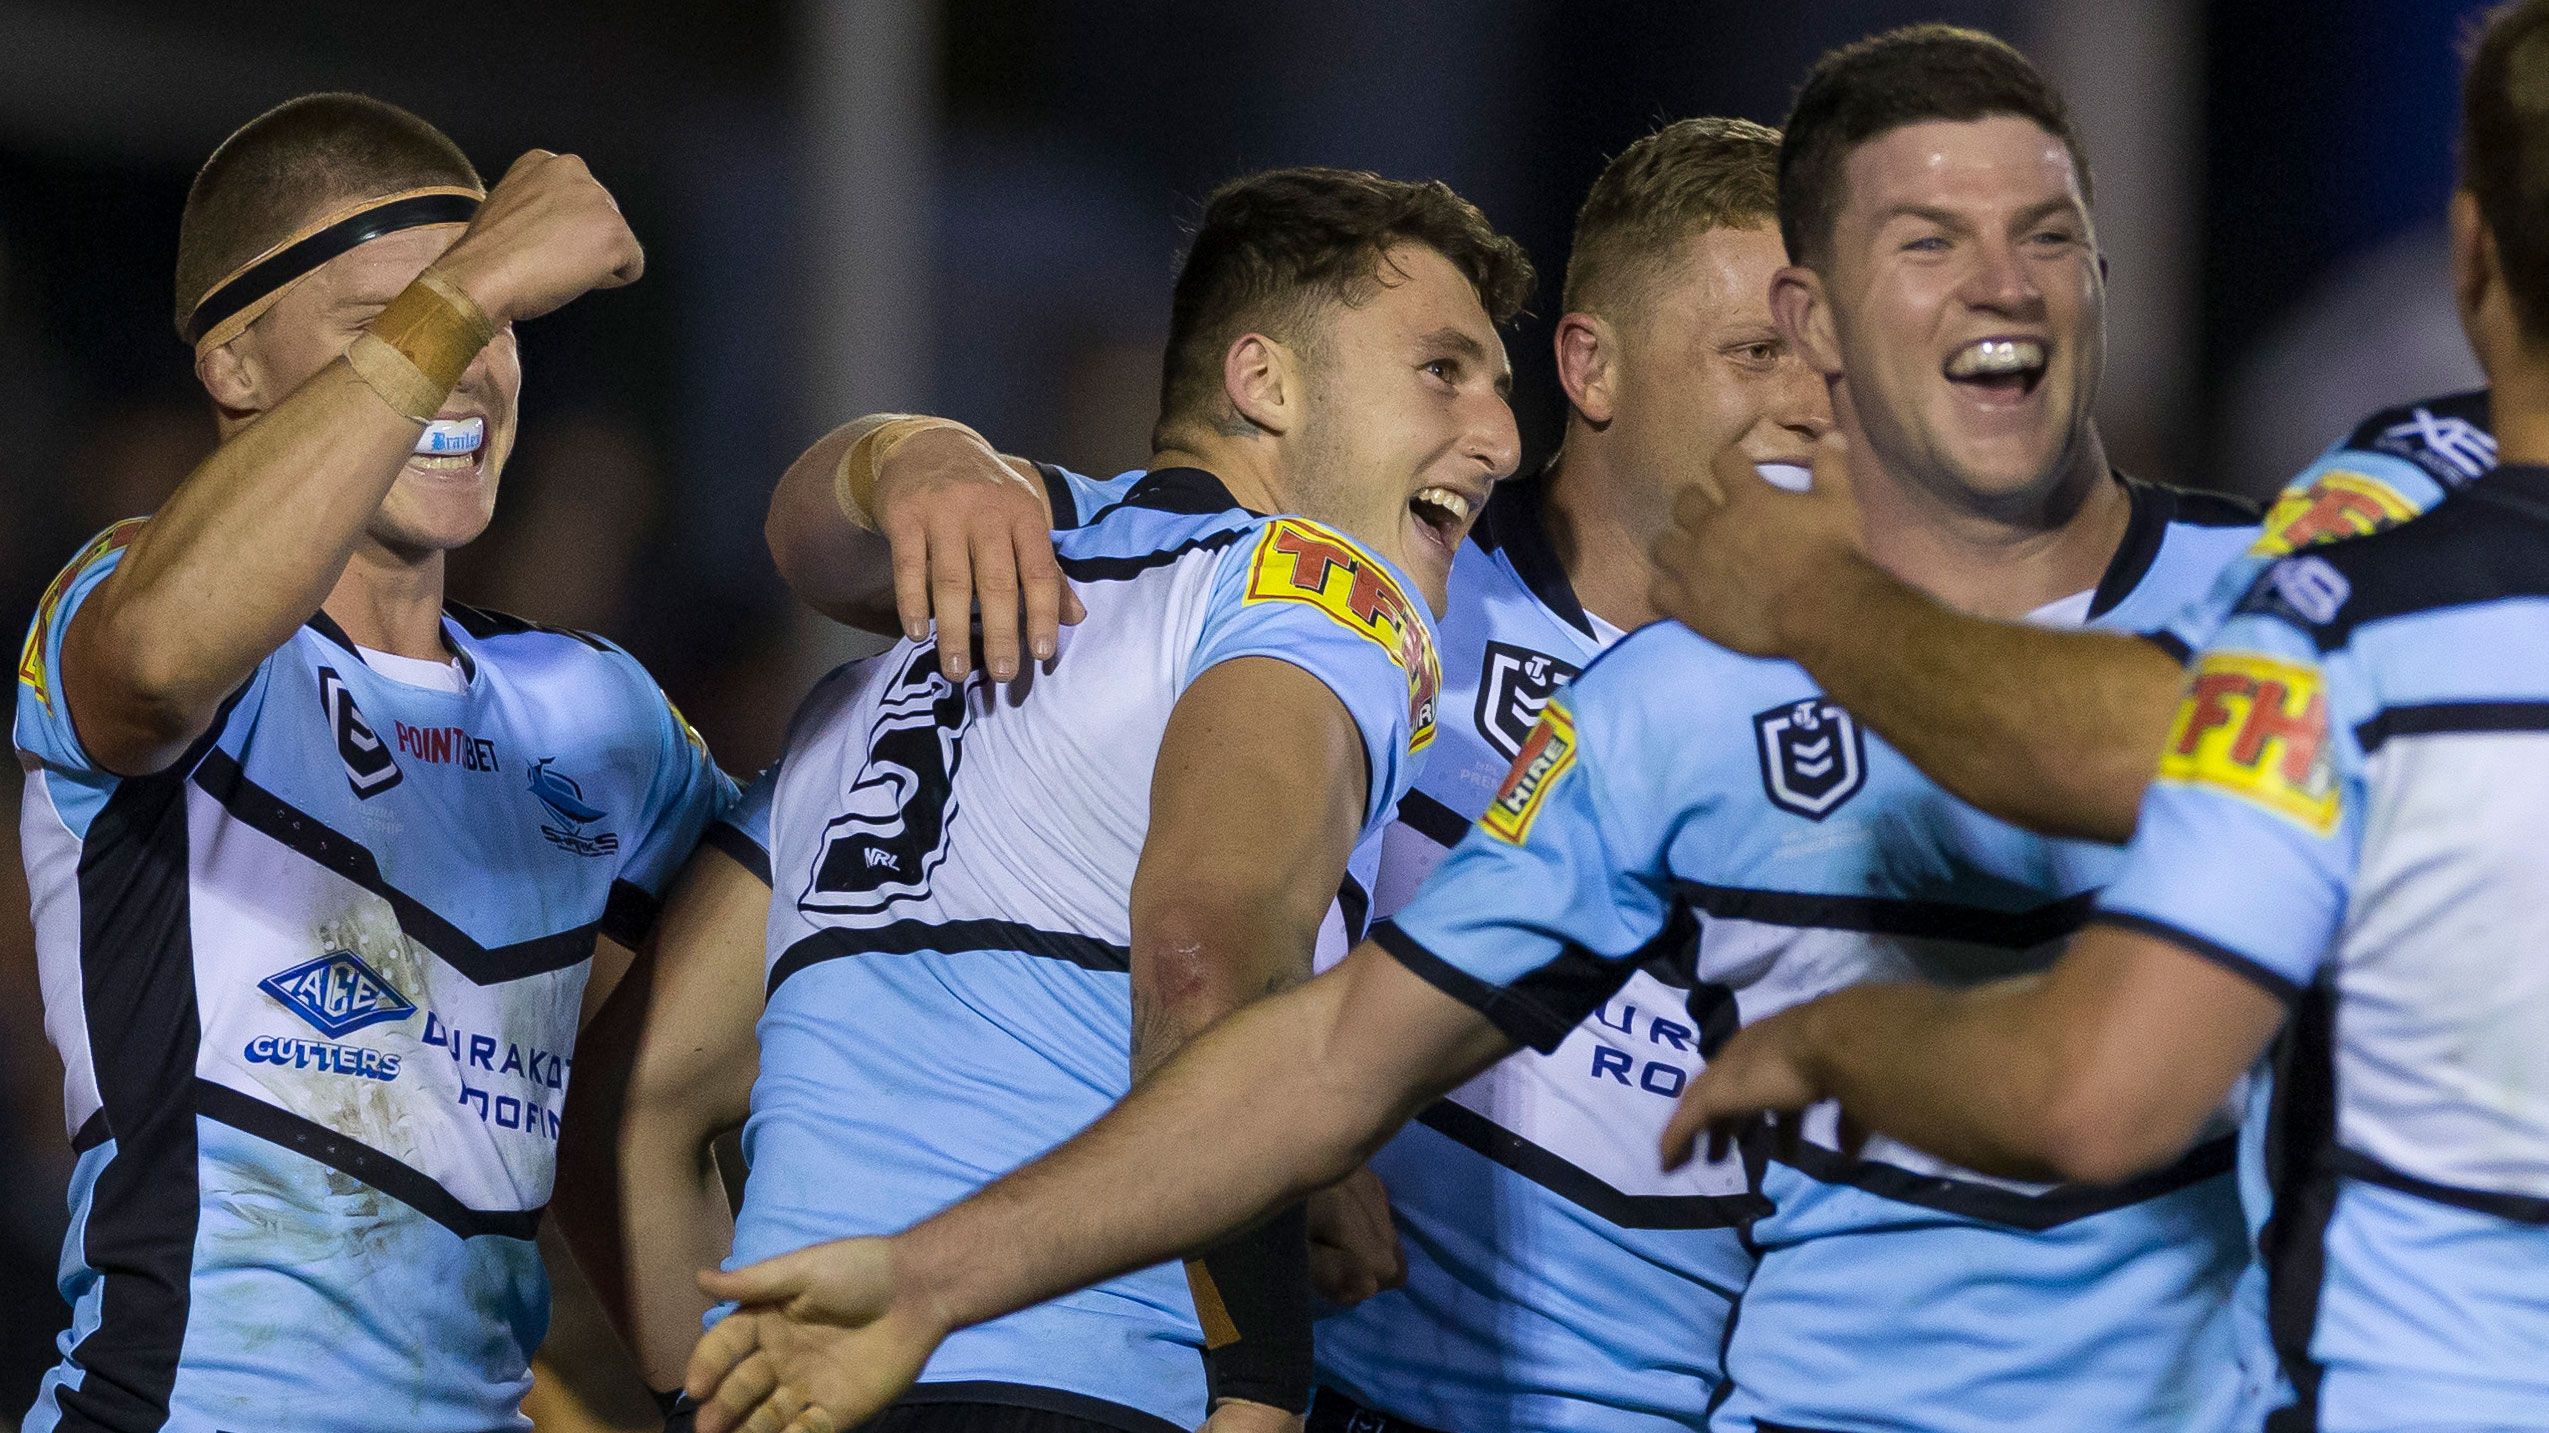 The Cronulla Sharks celebrate a try against the Rabbitohs.